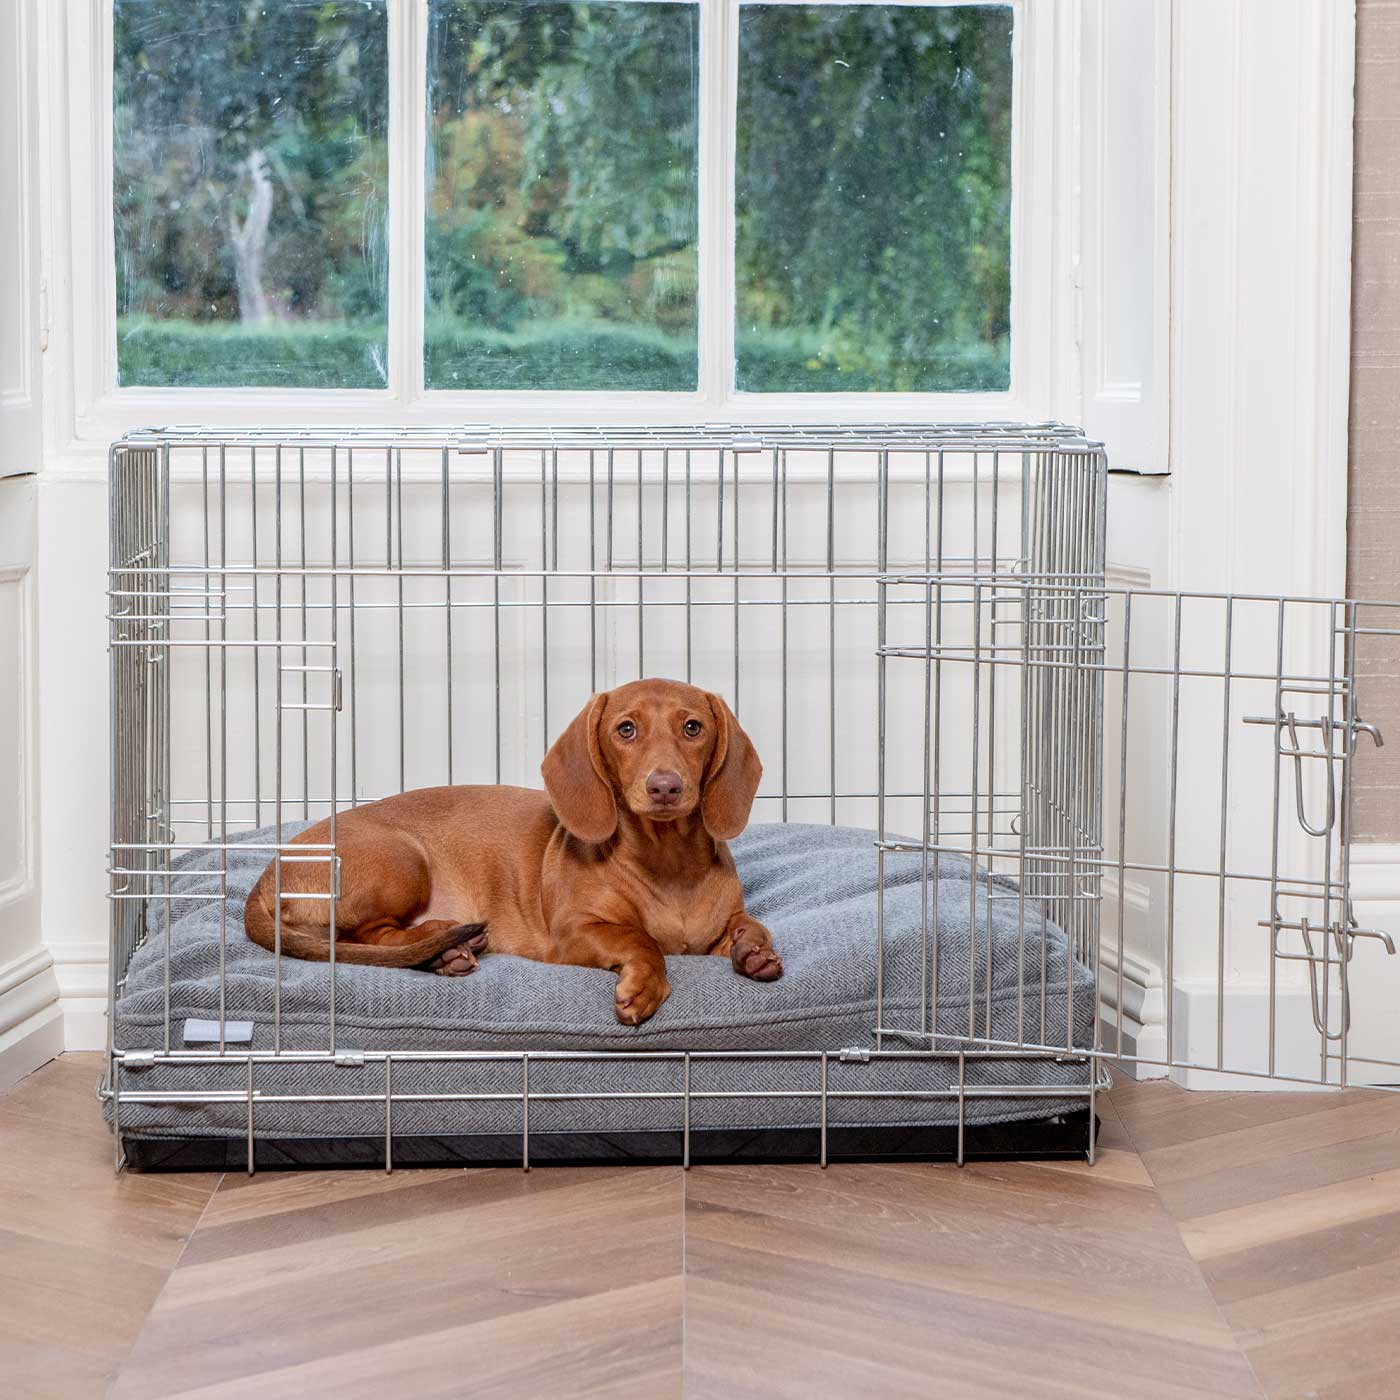 Luxury Dog Cage Cushion, Pewter Herringbone Tweed Cage Cushion The Perfect Dog Cage Accessory, Available To Personalize Now at Lords & Labradors US